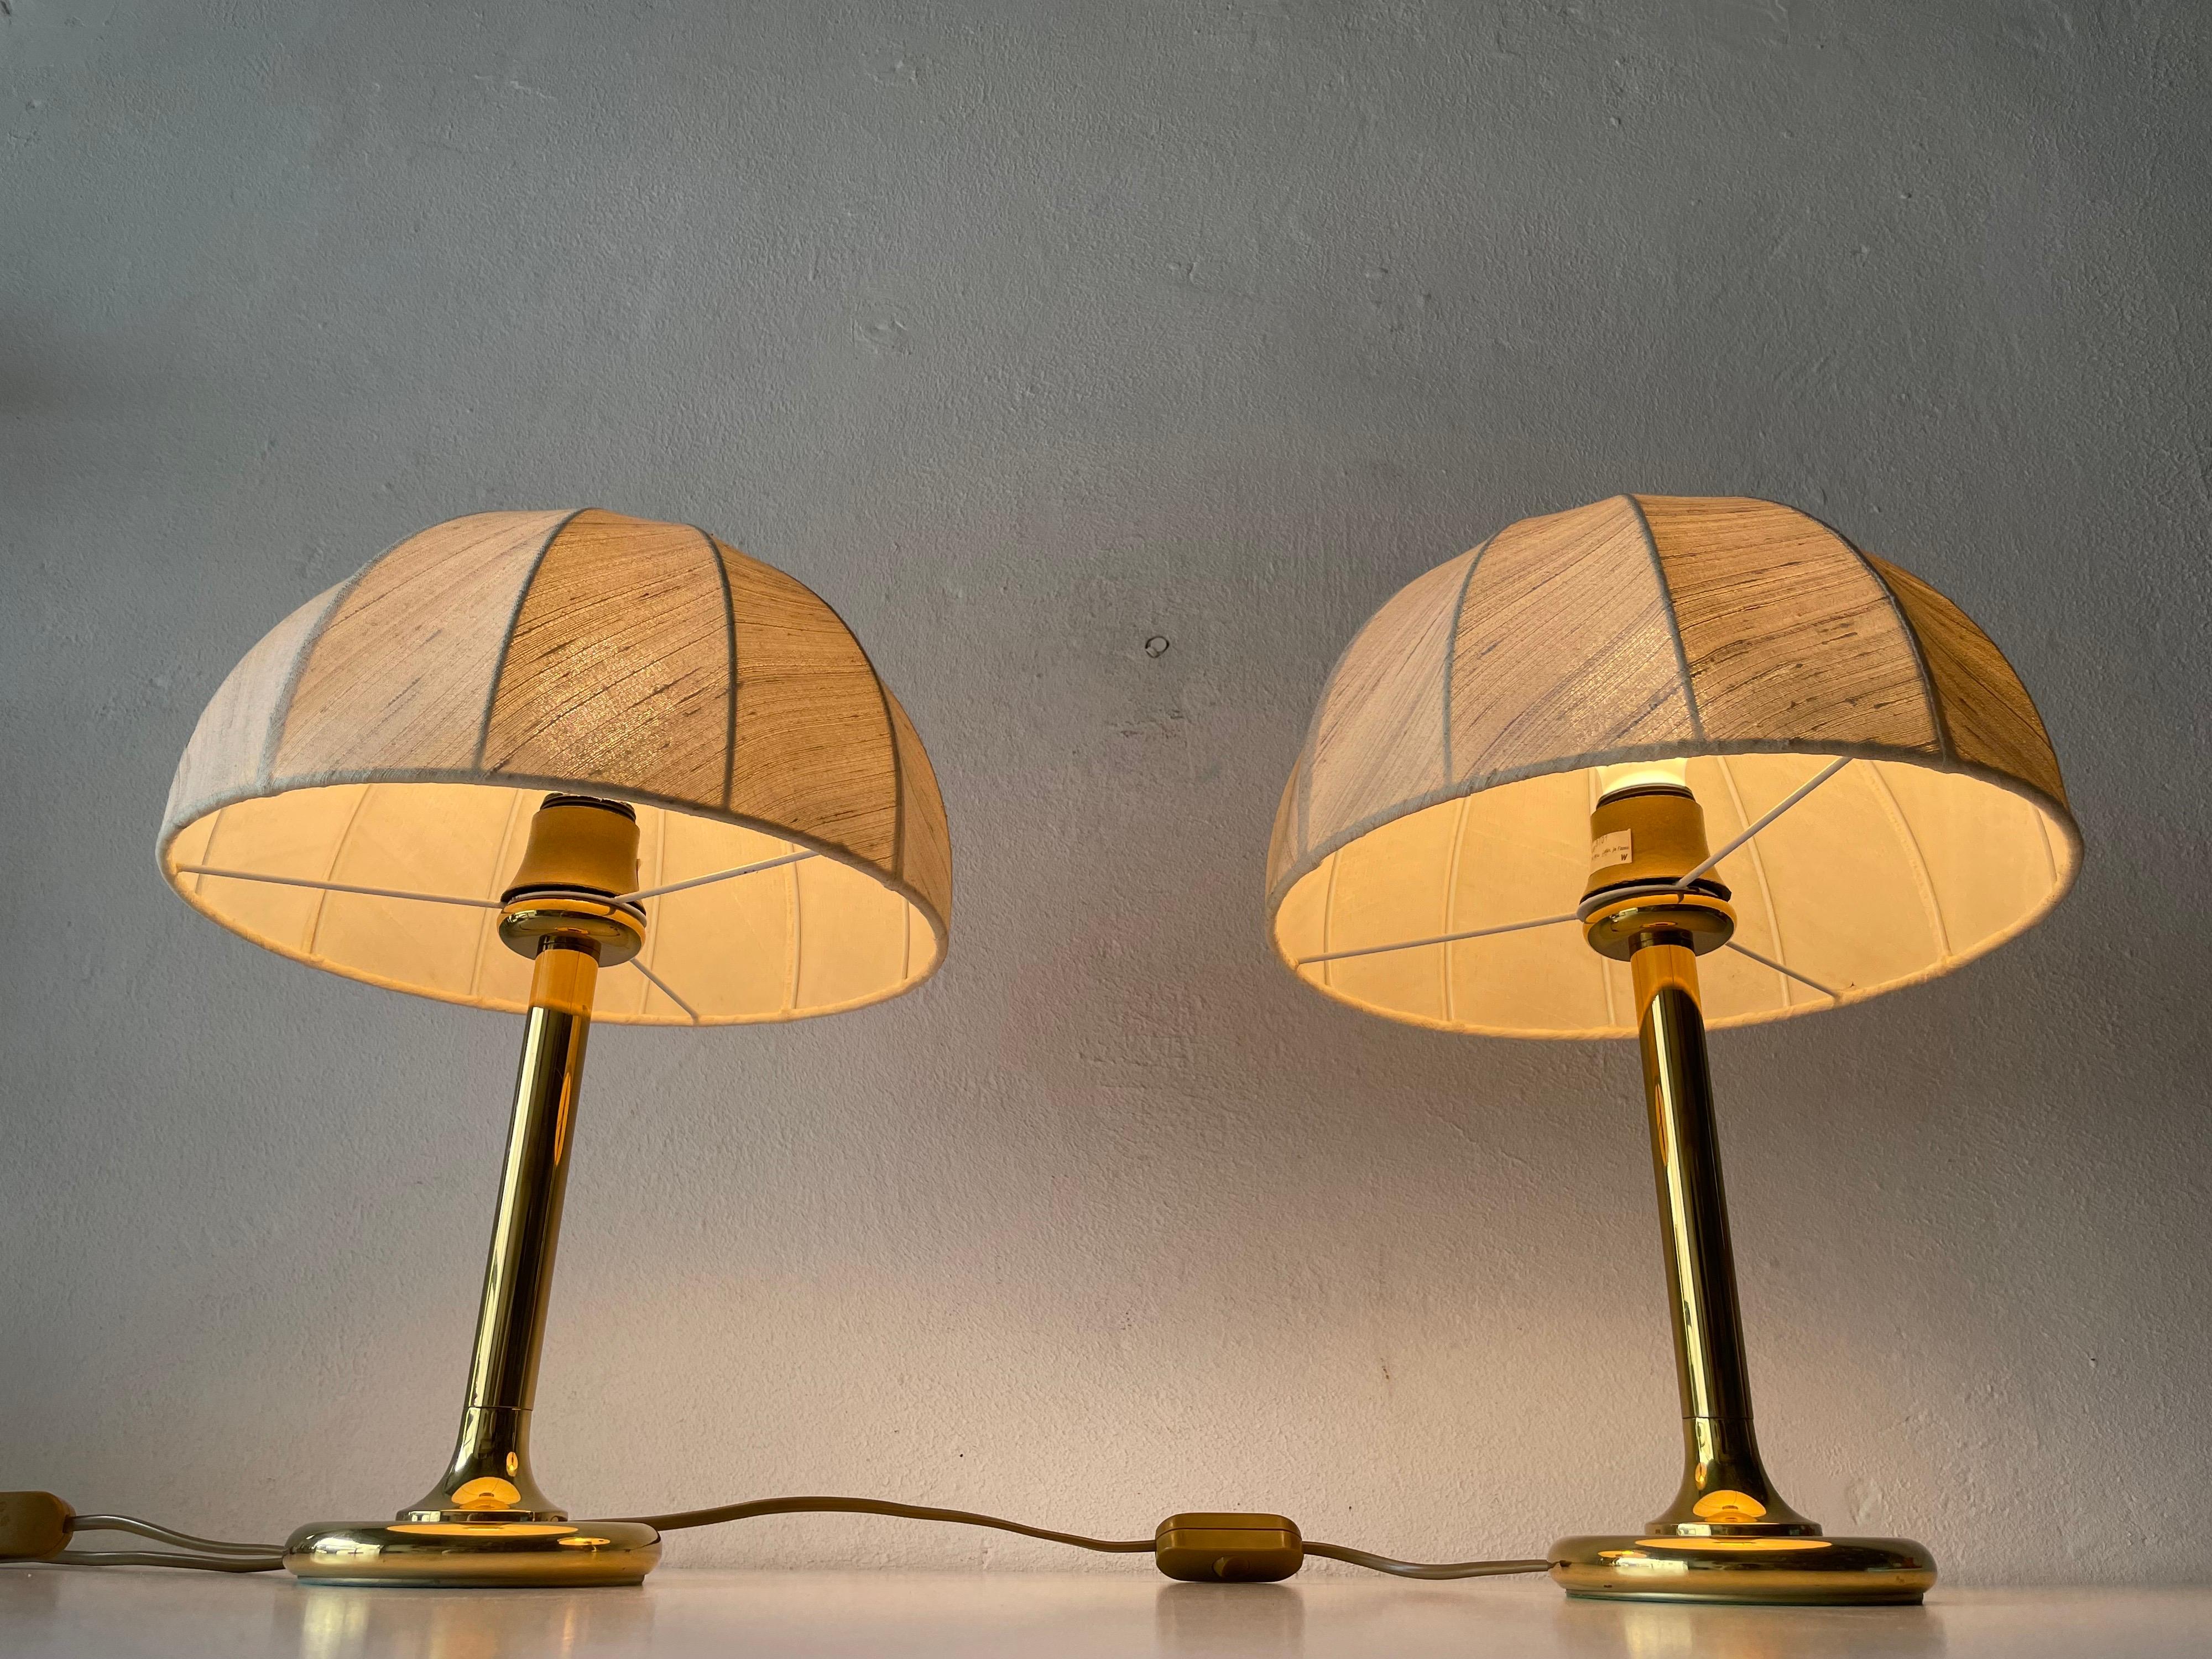 Fabric Shade & Brass Body Elegant Pair of Bedside Lamps by ERU, 1980s, Germany 5